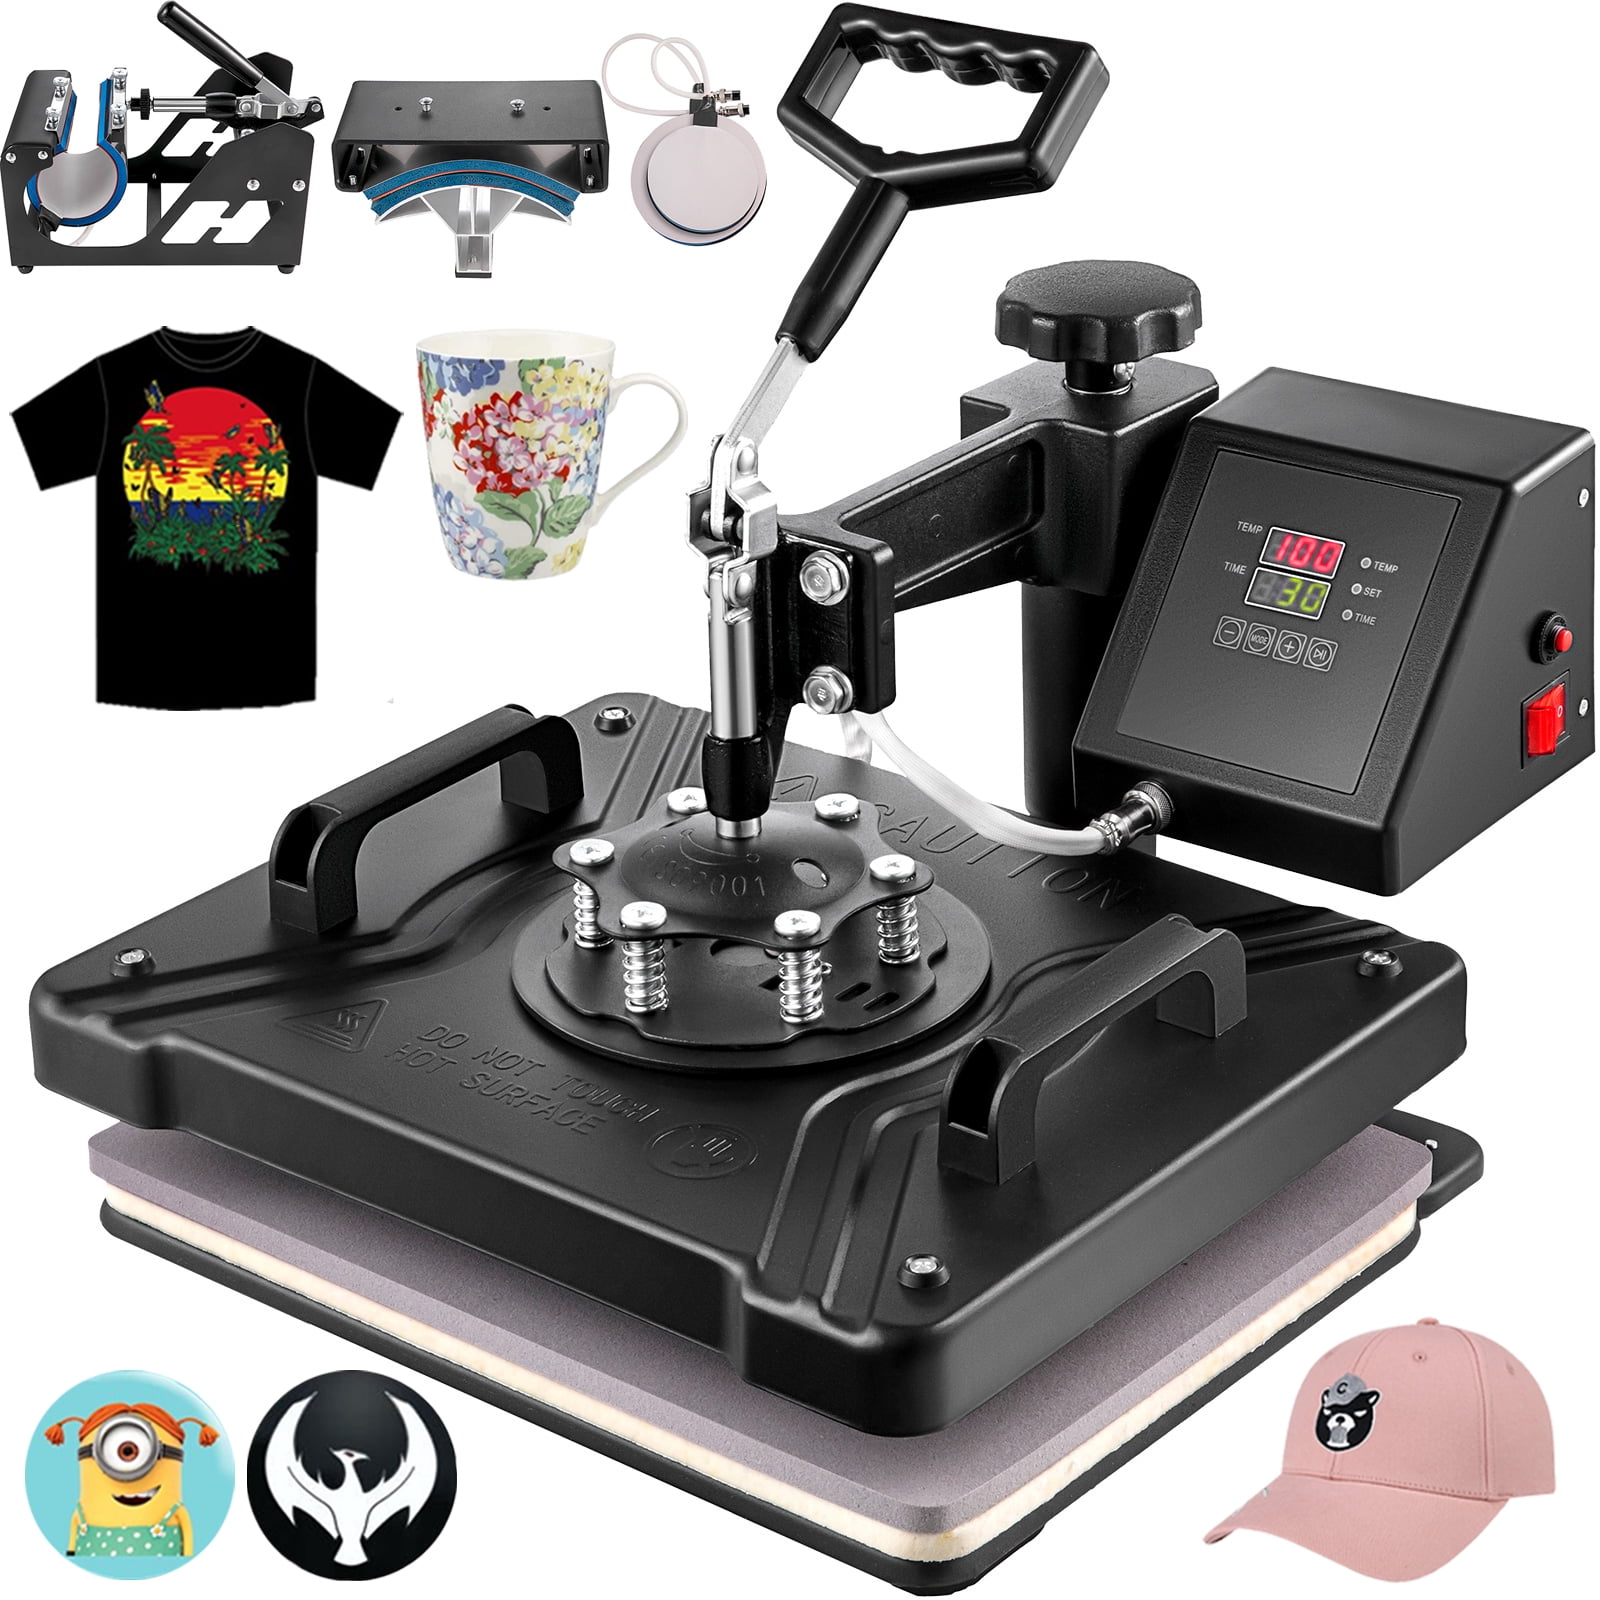 Secondhand 12X15" Swing Away Sublimation Transfer Heat Press Machine For T-Shirt 